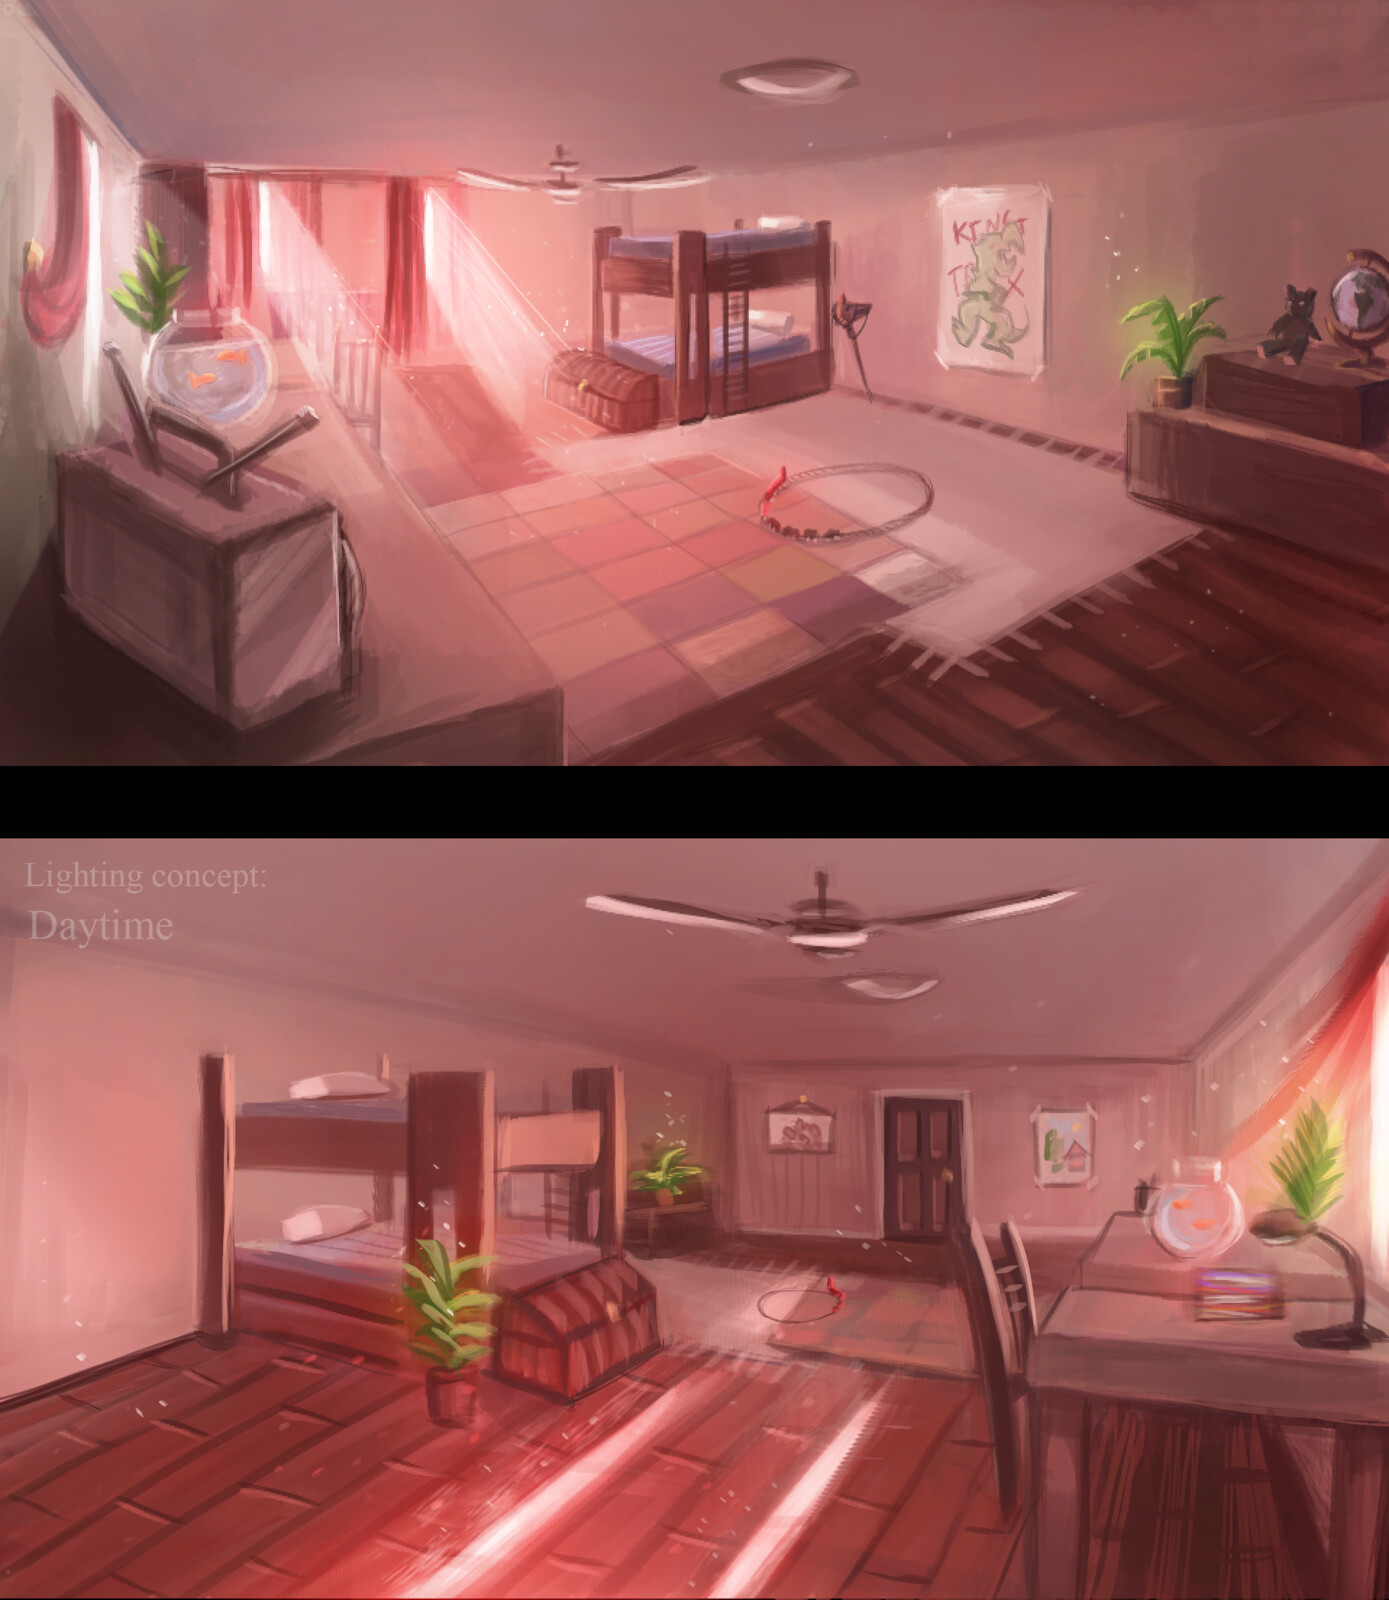 Paint over of the original concept for a child's bedroom. This set the overall mood and colour palette for the game.